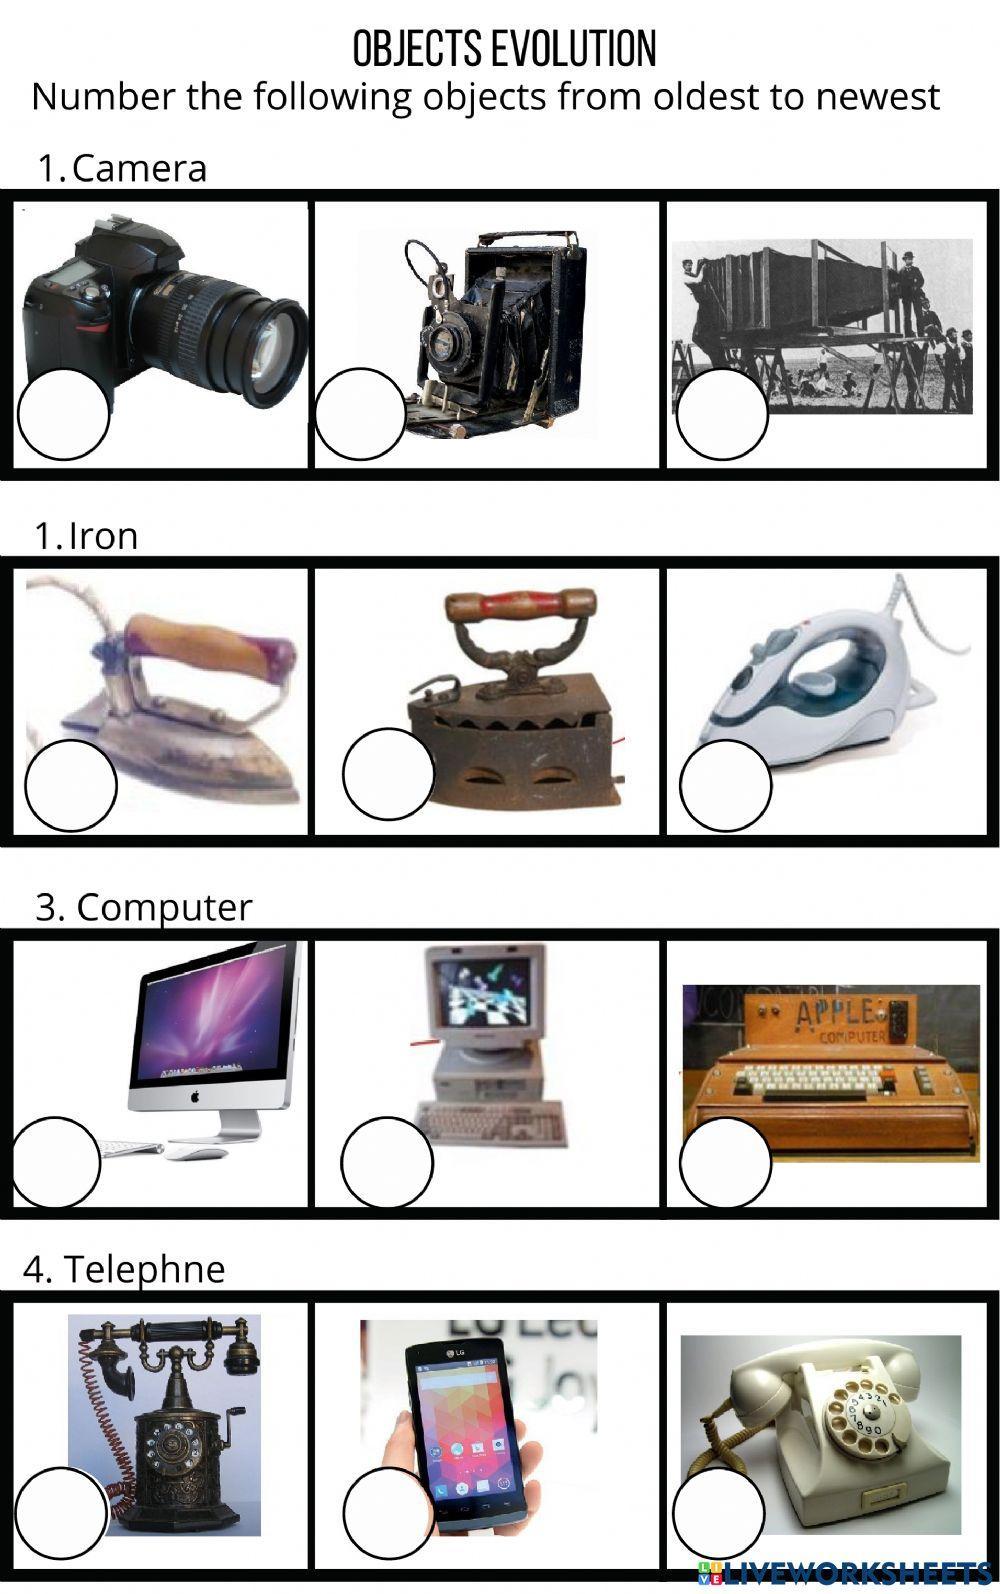 Evolution of objects